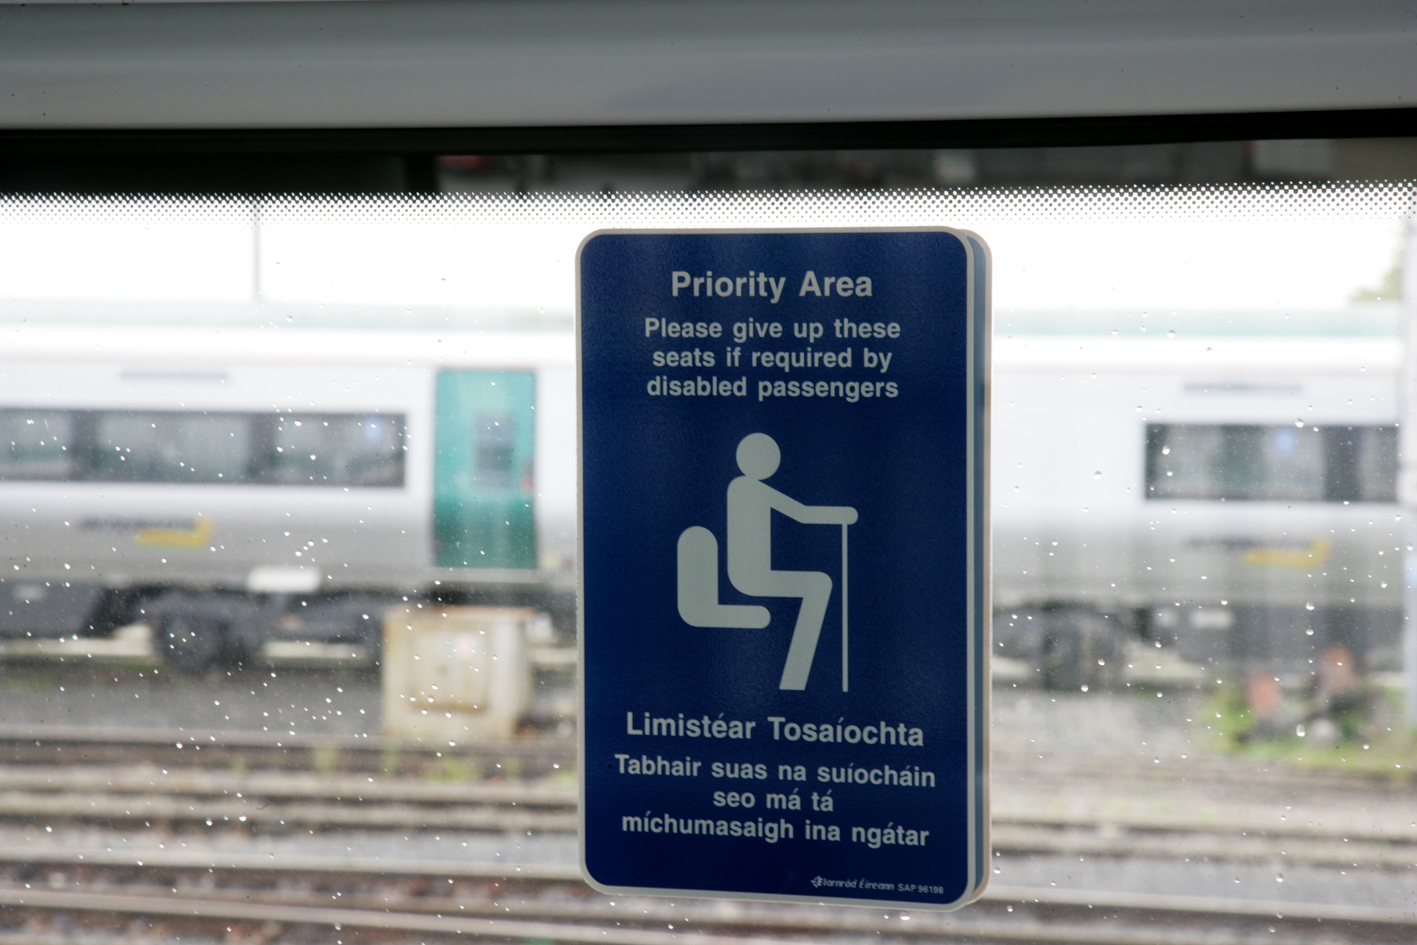 Accessibility image from train window